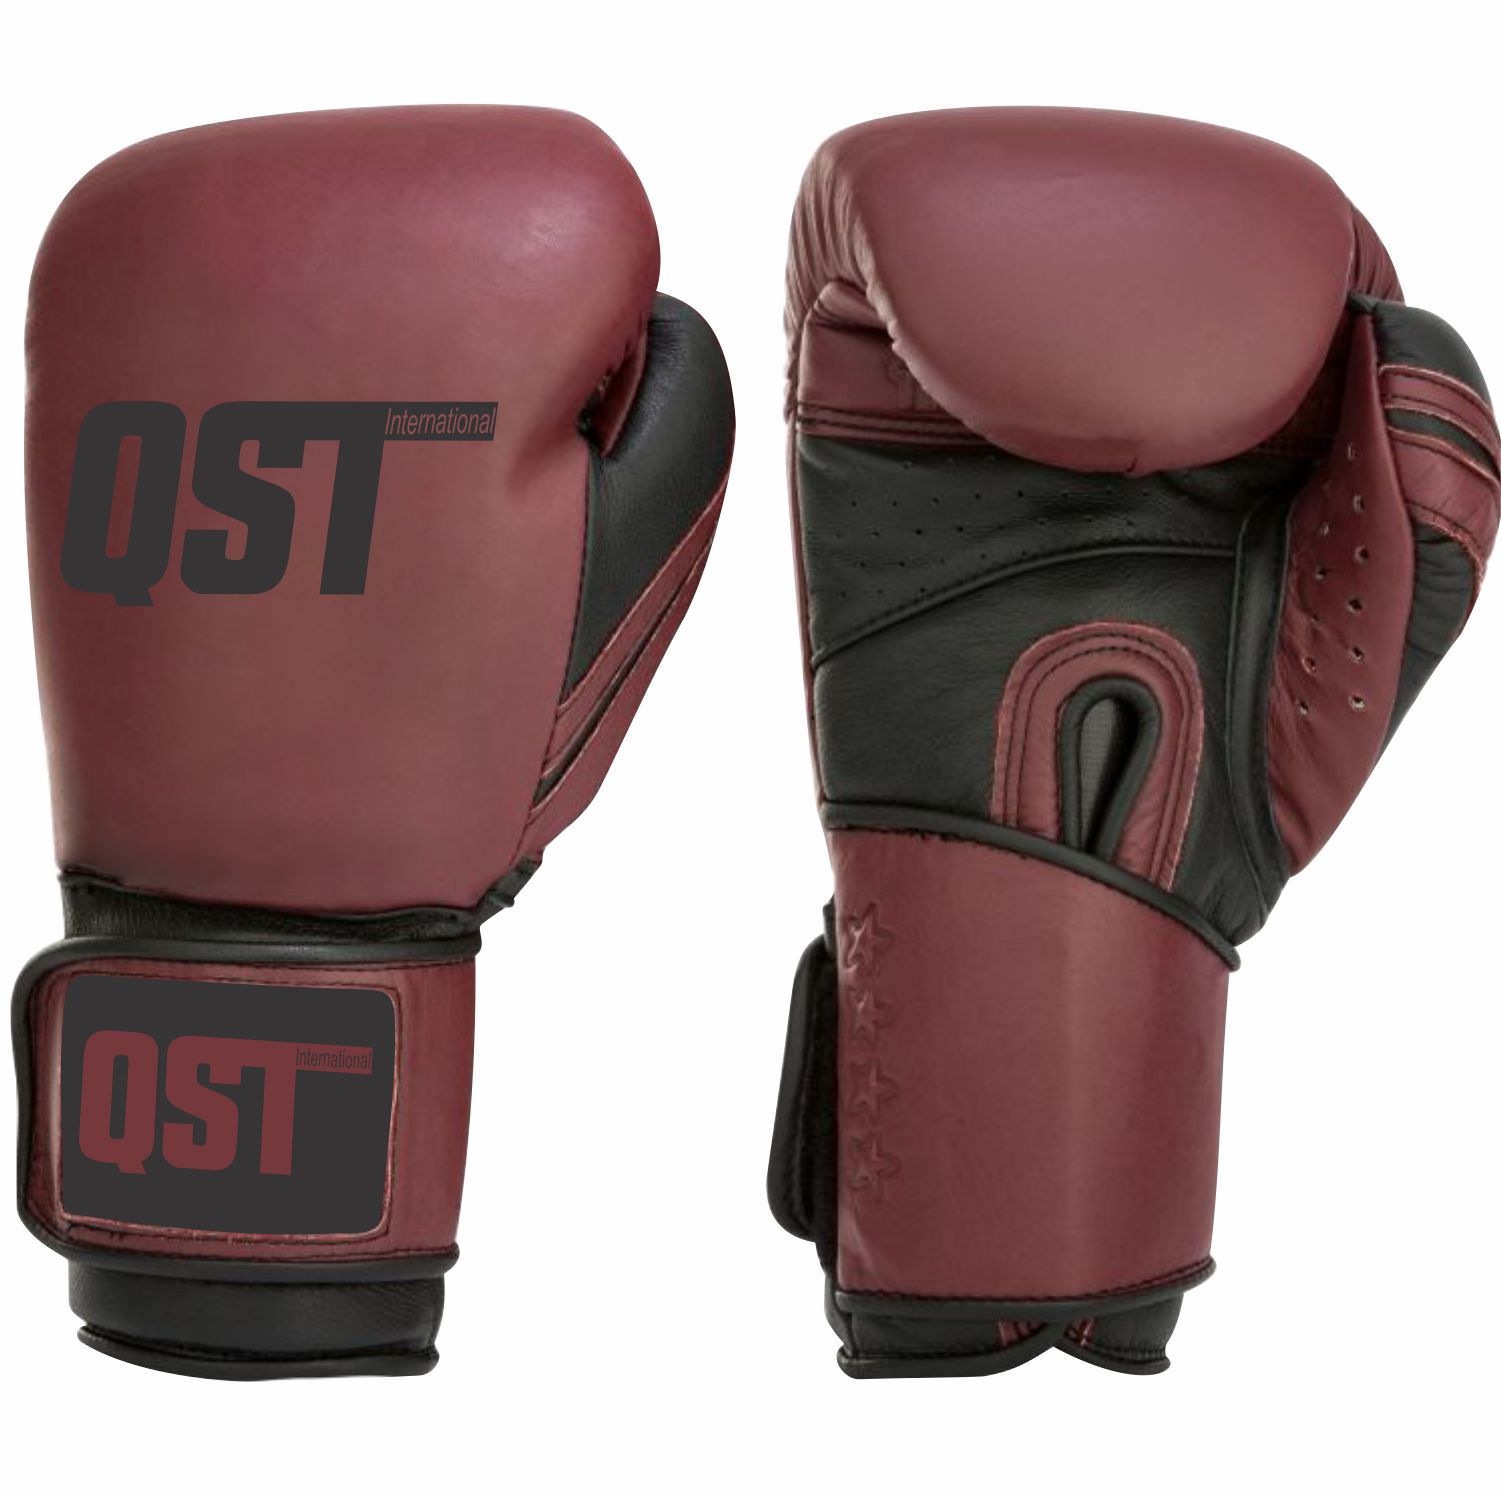 Professional Boxing Gloves - PRG-1520